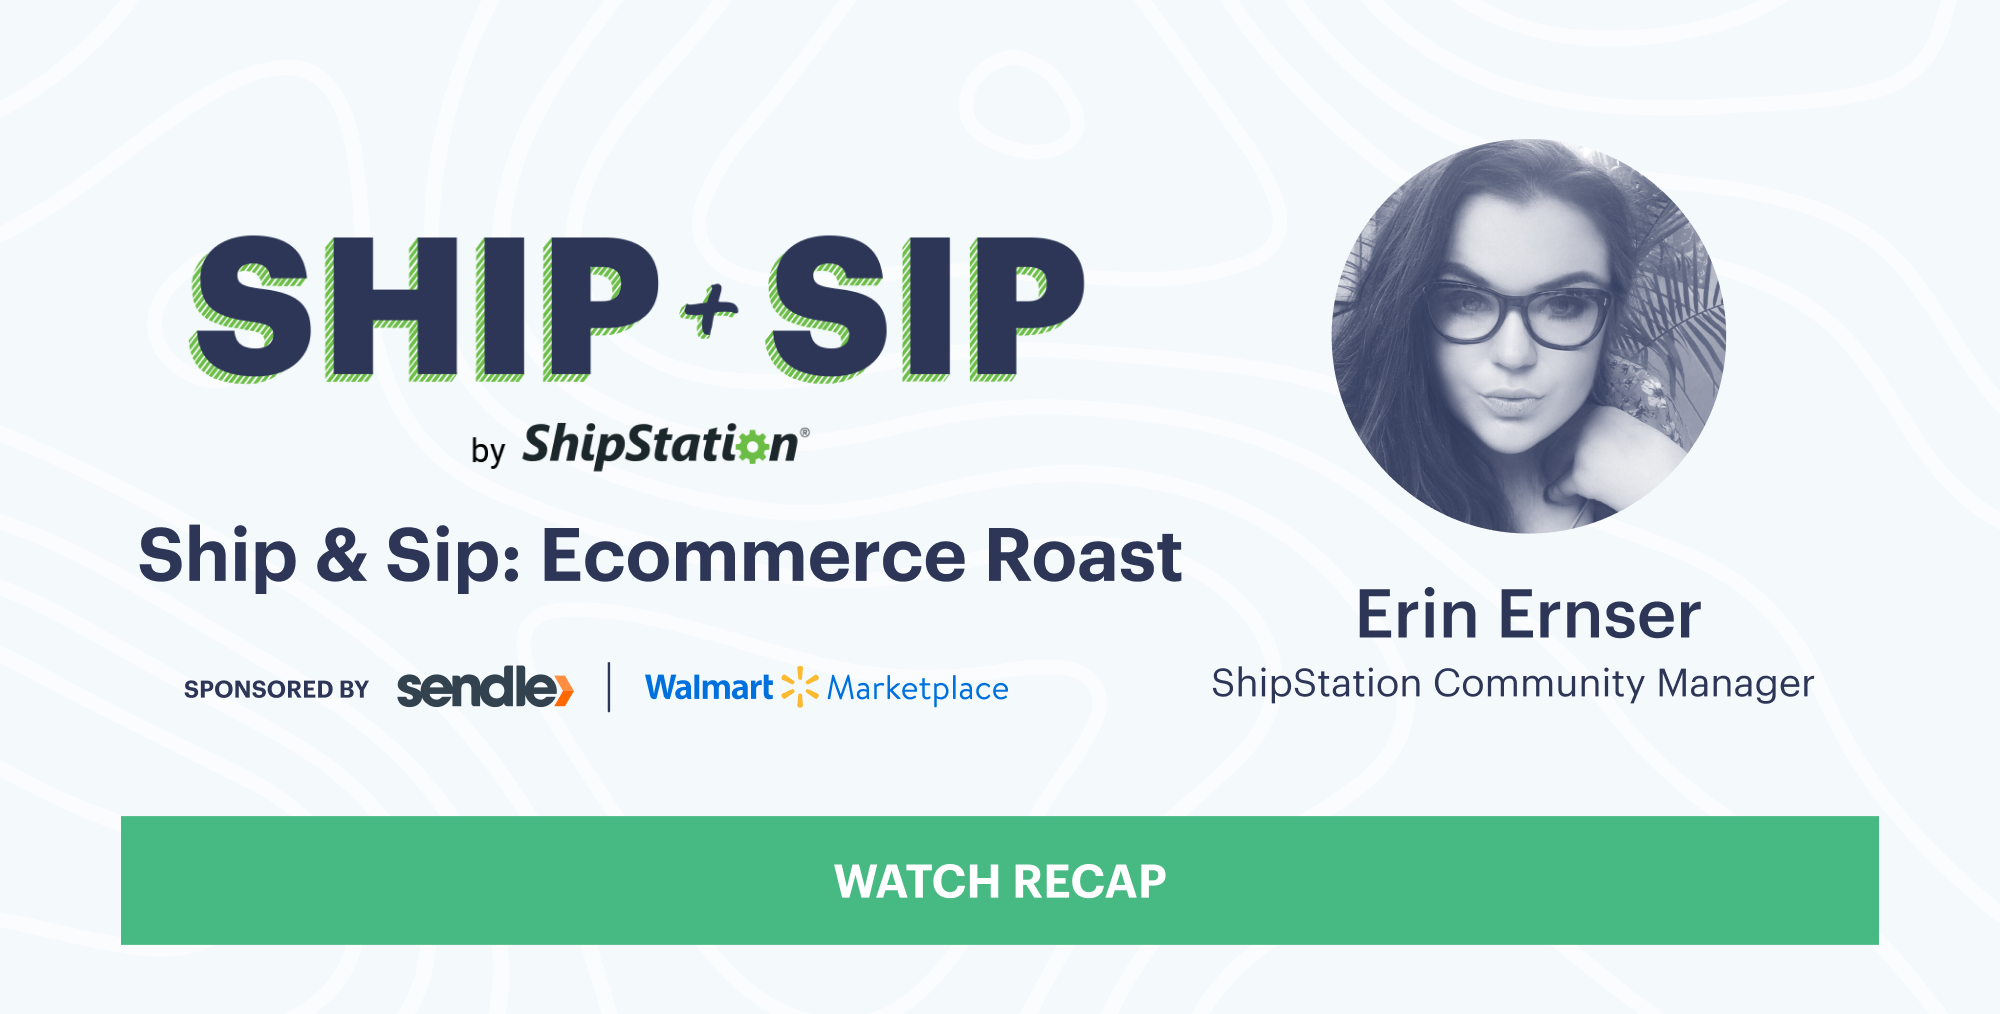 Find out what you missed at the May Ship & Sip event in our recap blog!